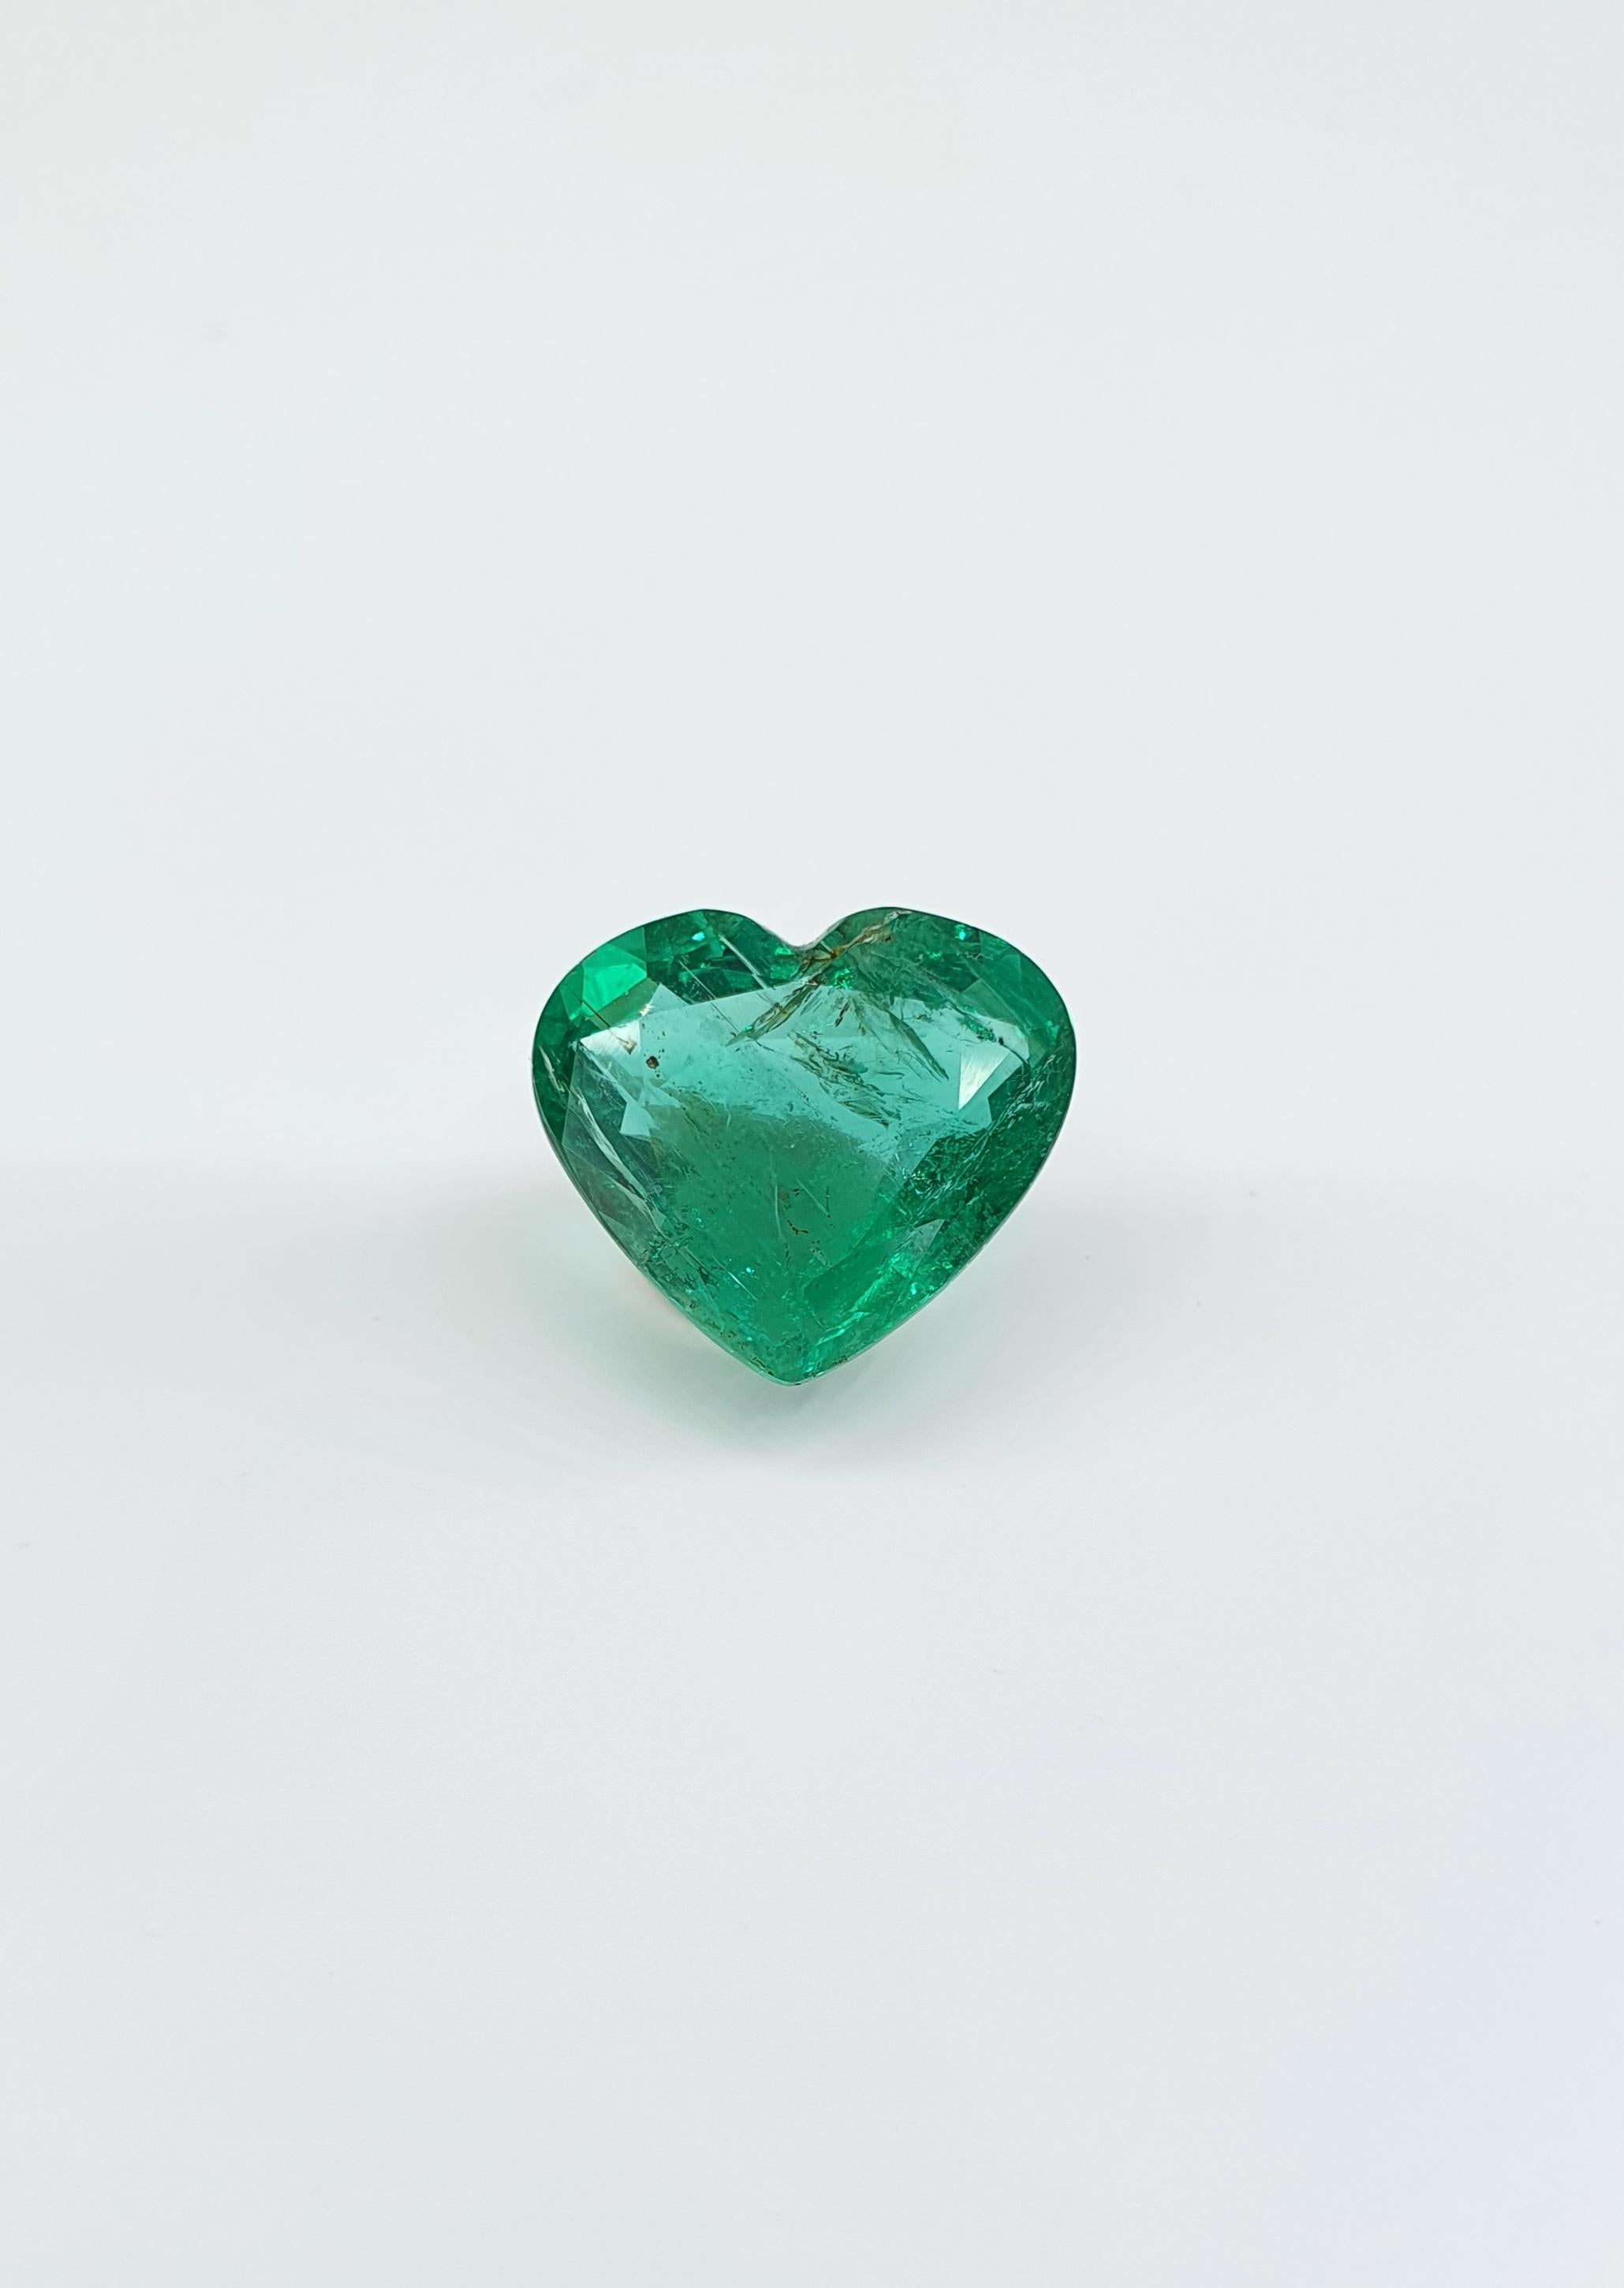 Stunning Heart Shape Zambian Emerald 
4.76 ct
Minor natural oil enhancement.
Stone contains natural micro chinks, which is common for natural emeralds.
 Any jewellery item can be produced by your order. Pendant, ring or brooch. 